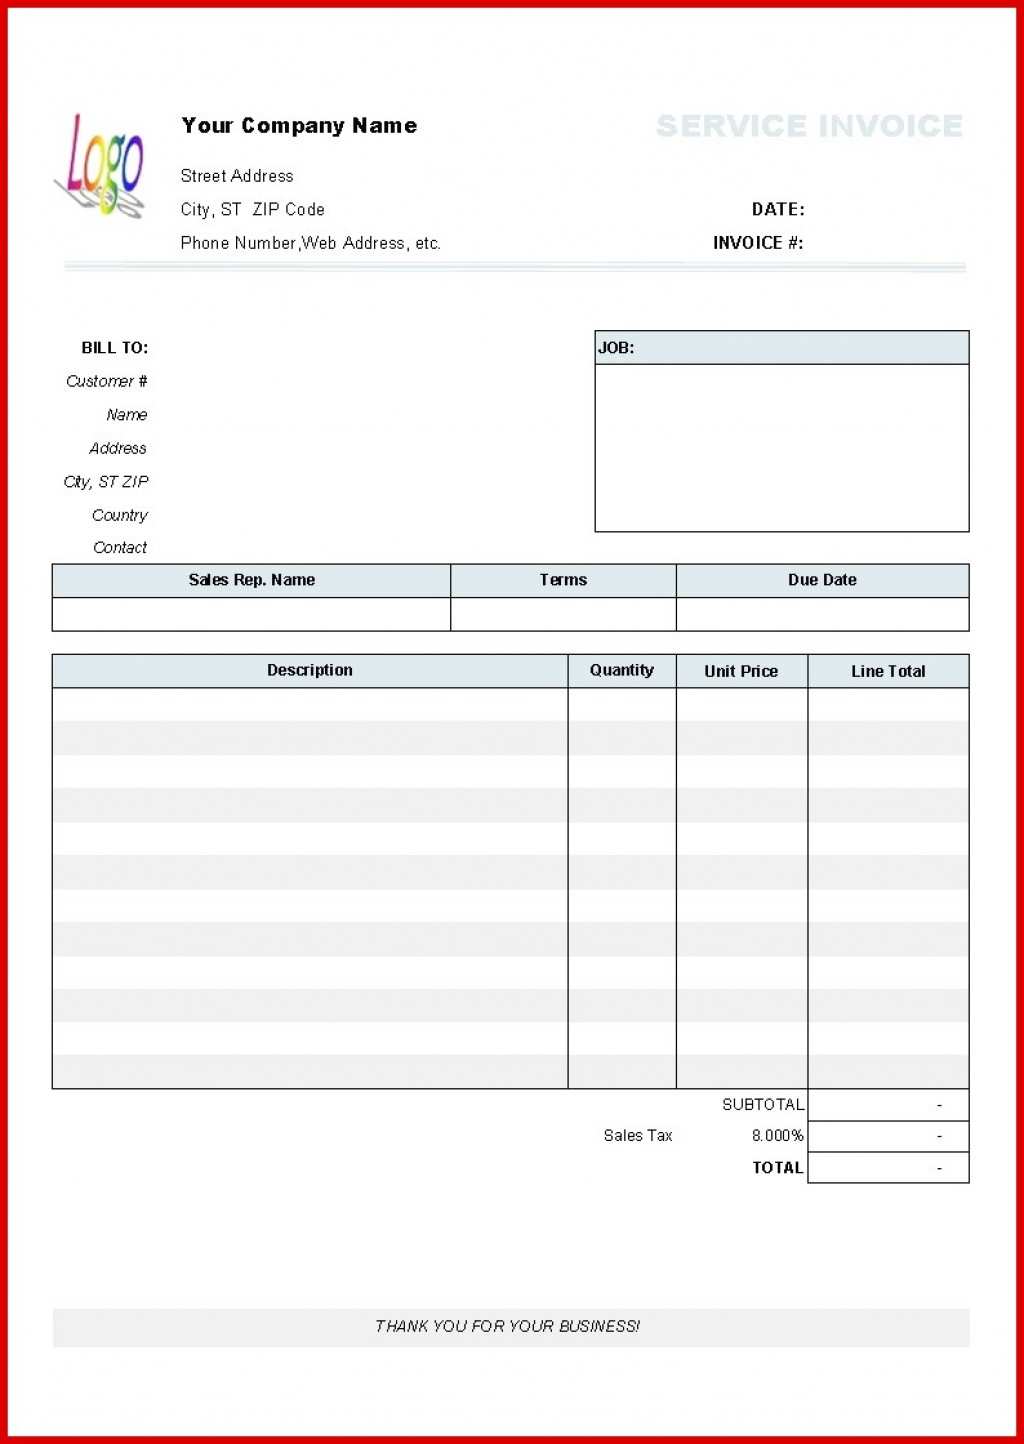 88 Report Personal Invoice Template Uk Word in Photoshop for Personal Invoice Template Uk Word